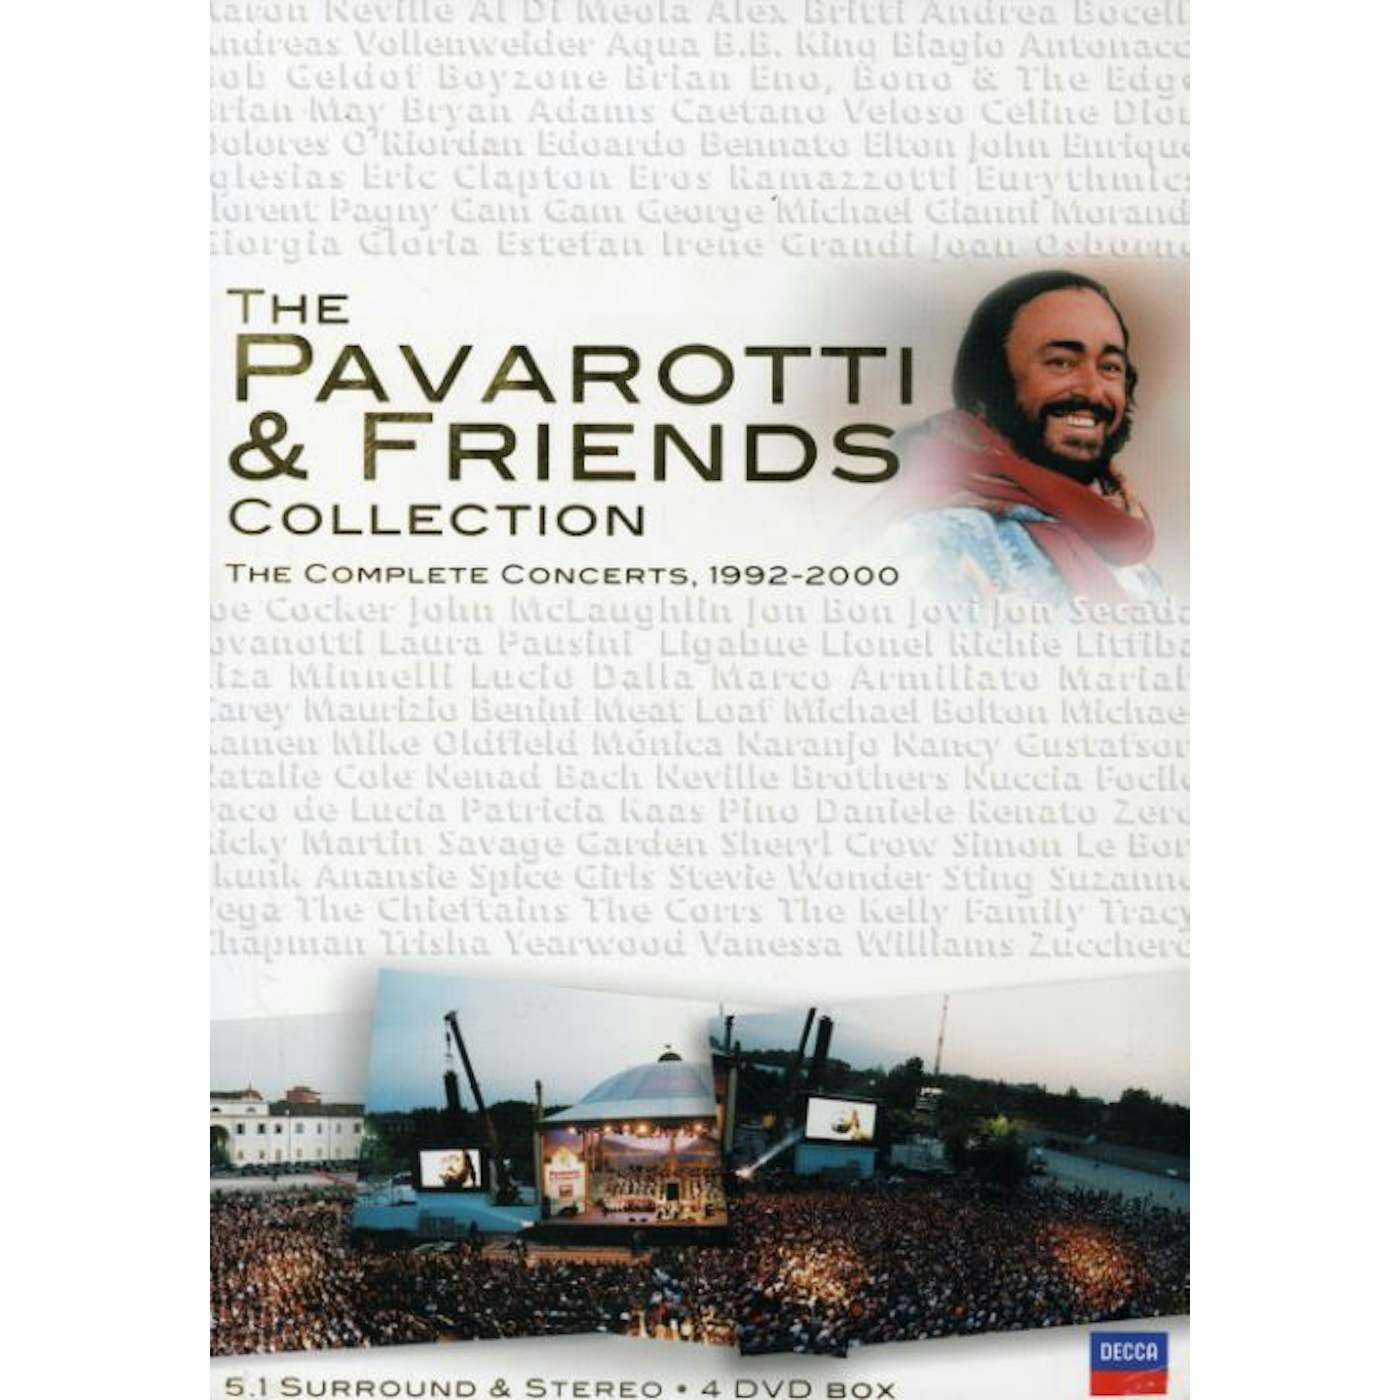 Luciano Pavarotti & FRIENDS COLLECTION DVD